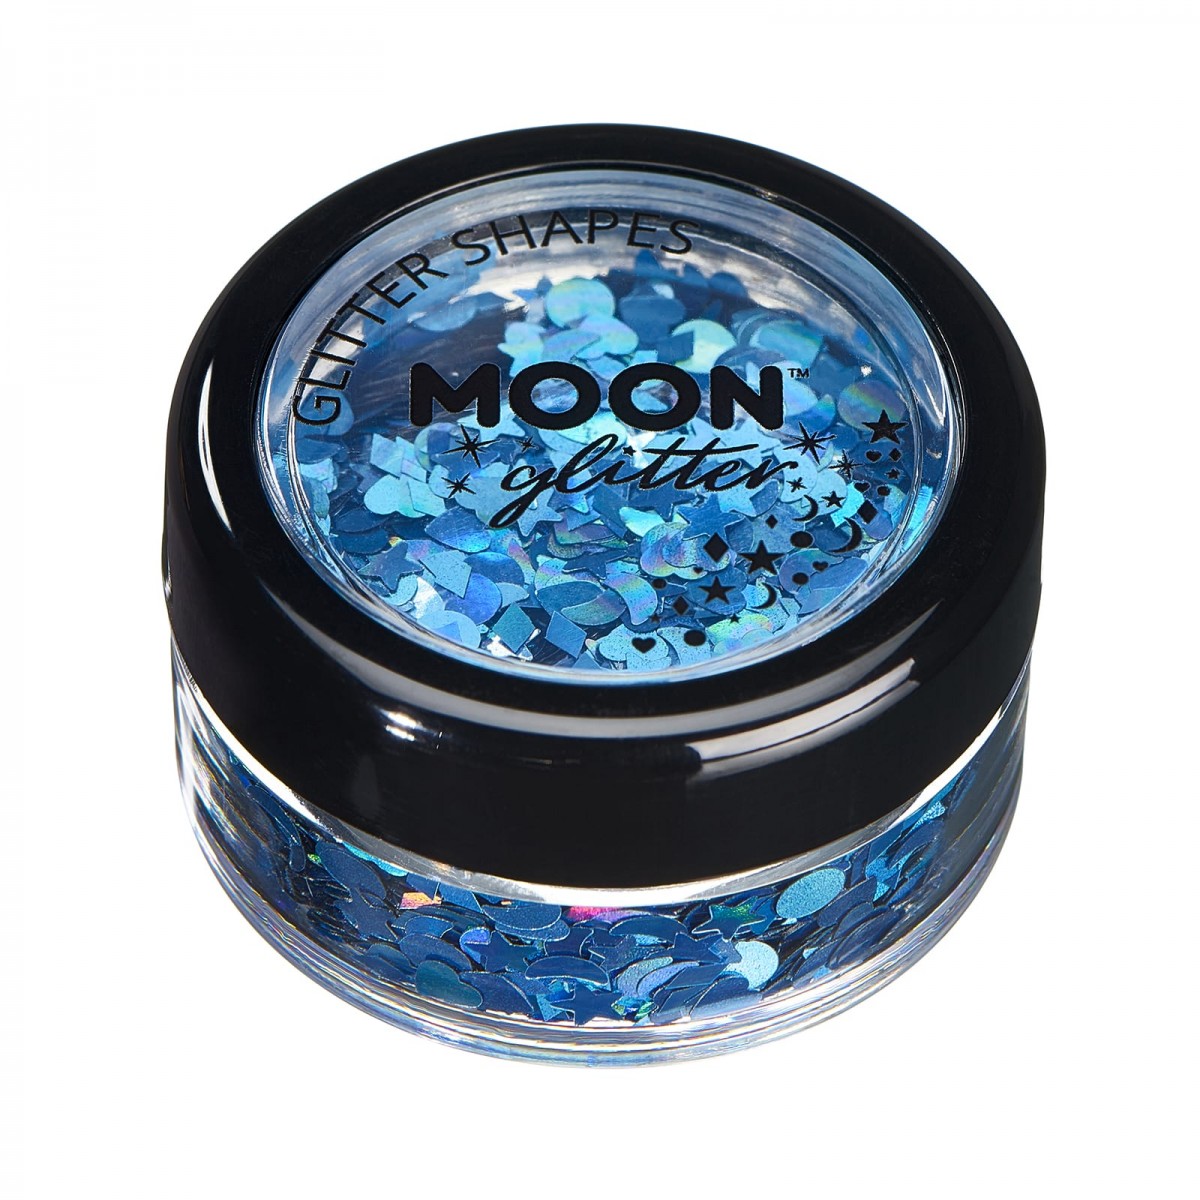 MOON CREATIONS G31 HOLOGRAPHIC GLITTER SHAPES BLUE 3g